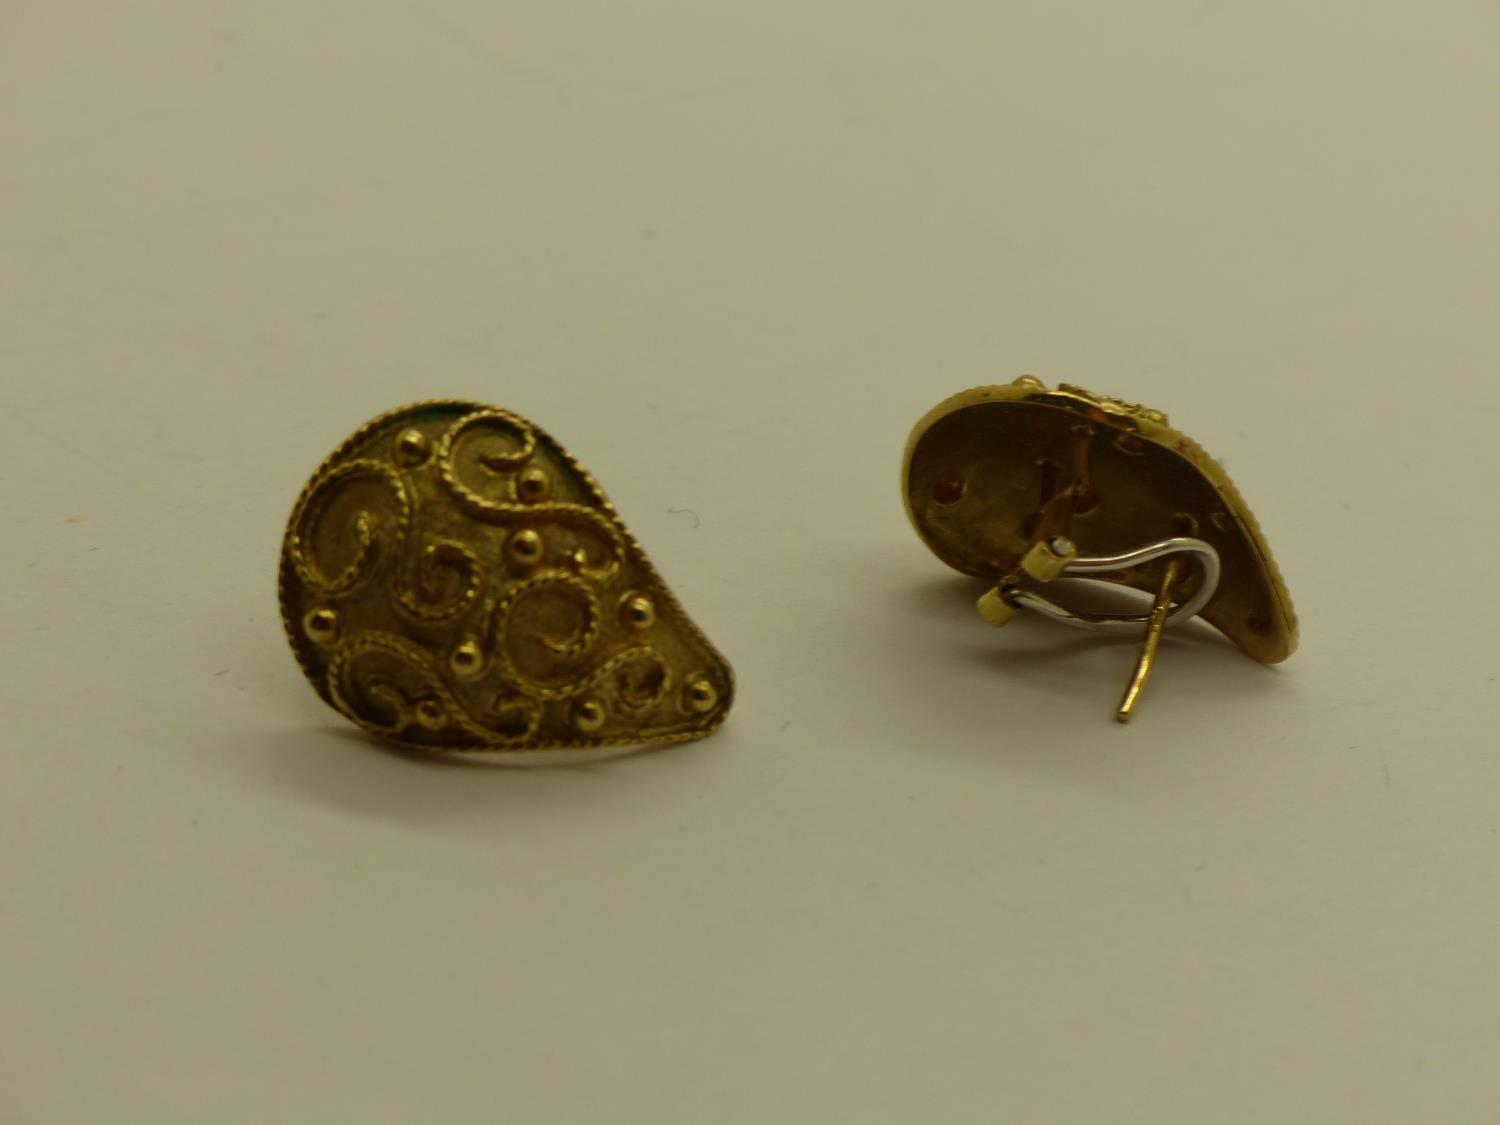 Pair of 9ct gold earrings, 4.4g. UK P&P Group 0 (£6+VAT for the first lot and £1+VAT for